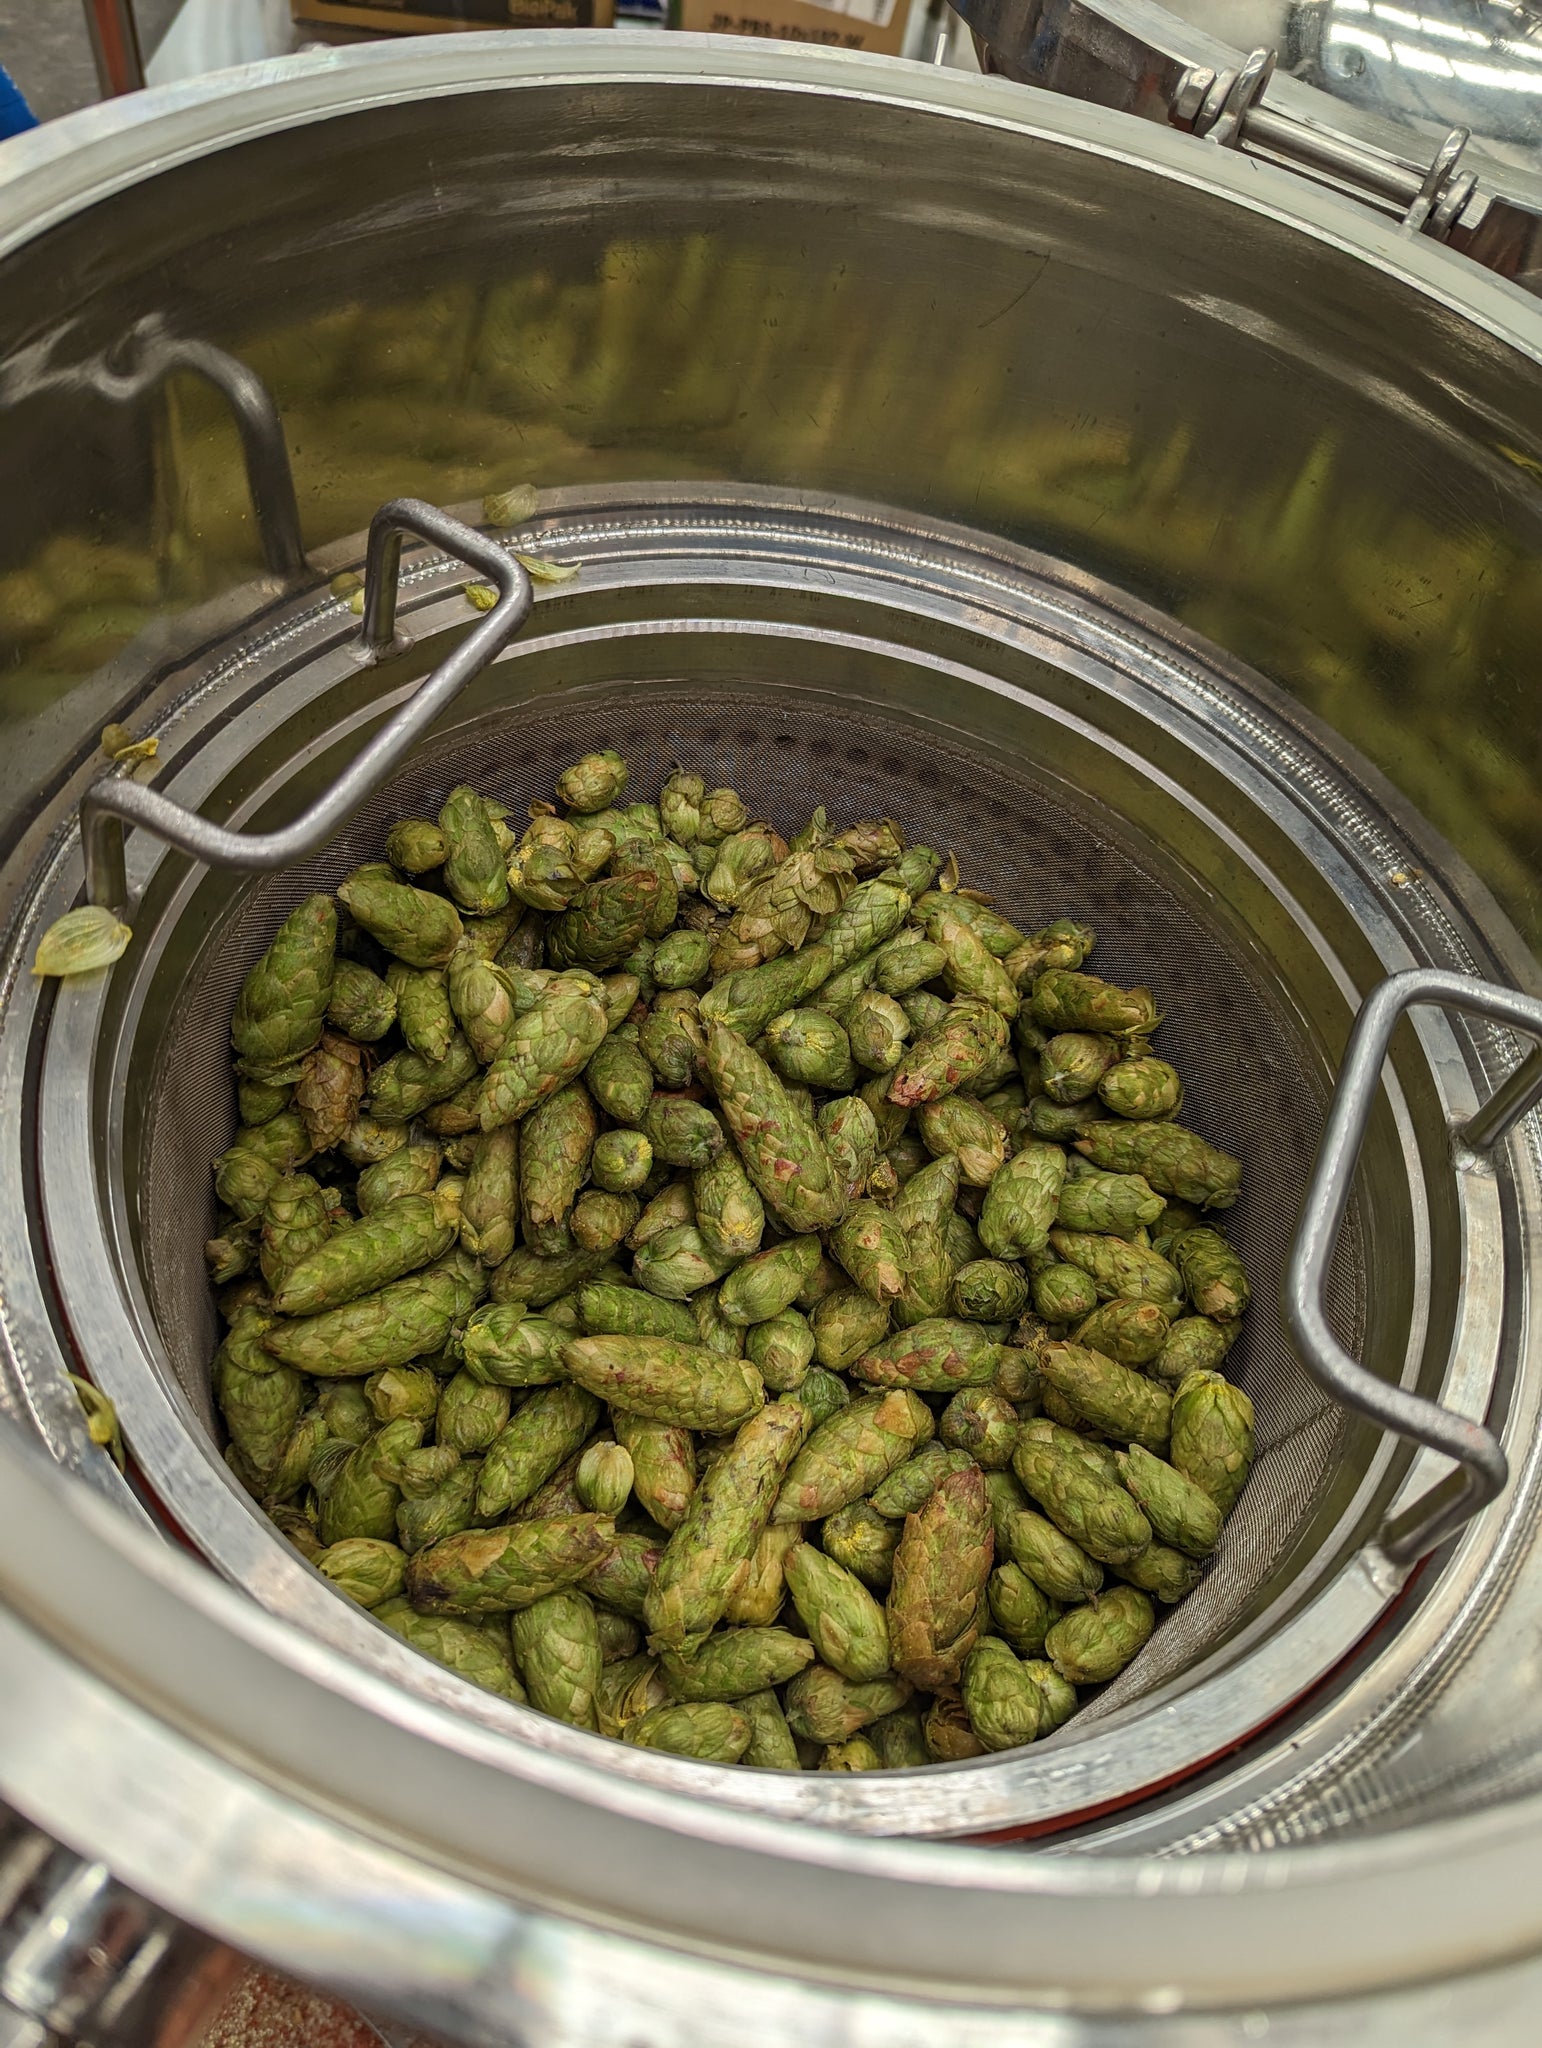 Fresh Galaxy hops in our wet hop IPA